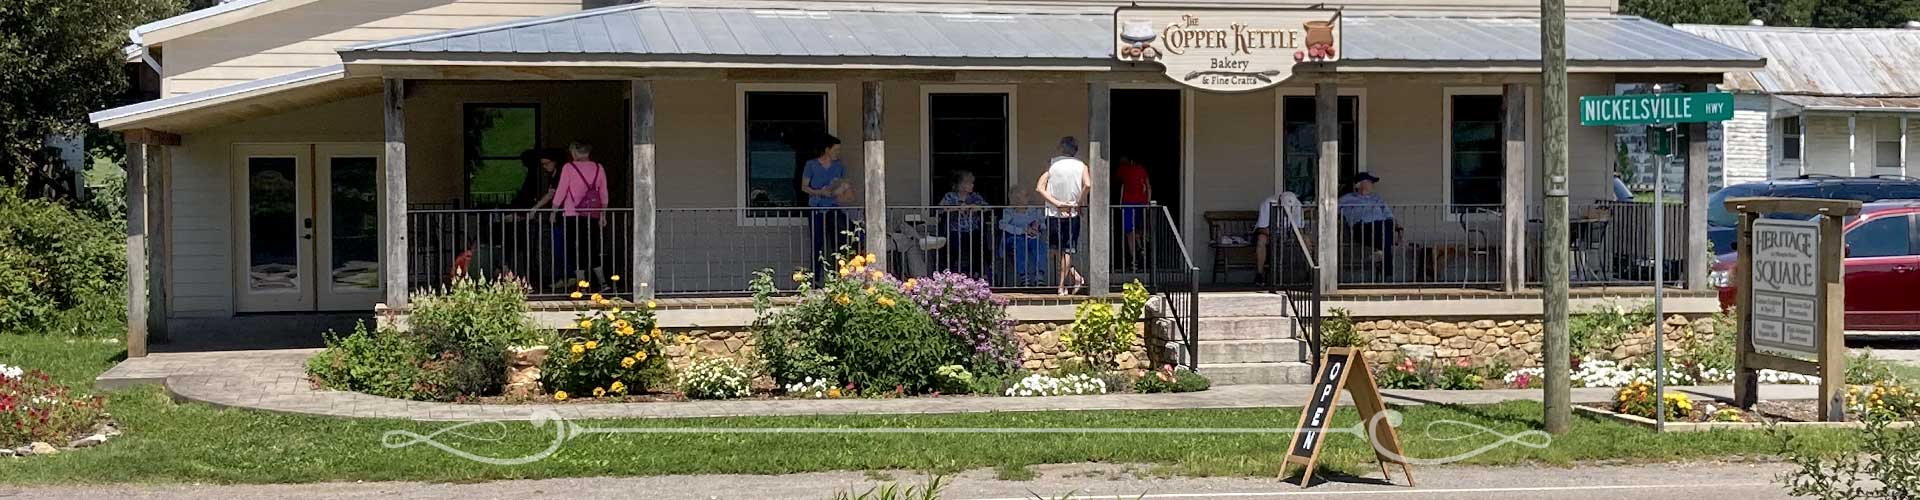 Copper Kettle Bakery and Craft Shop Welcomes You